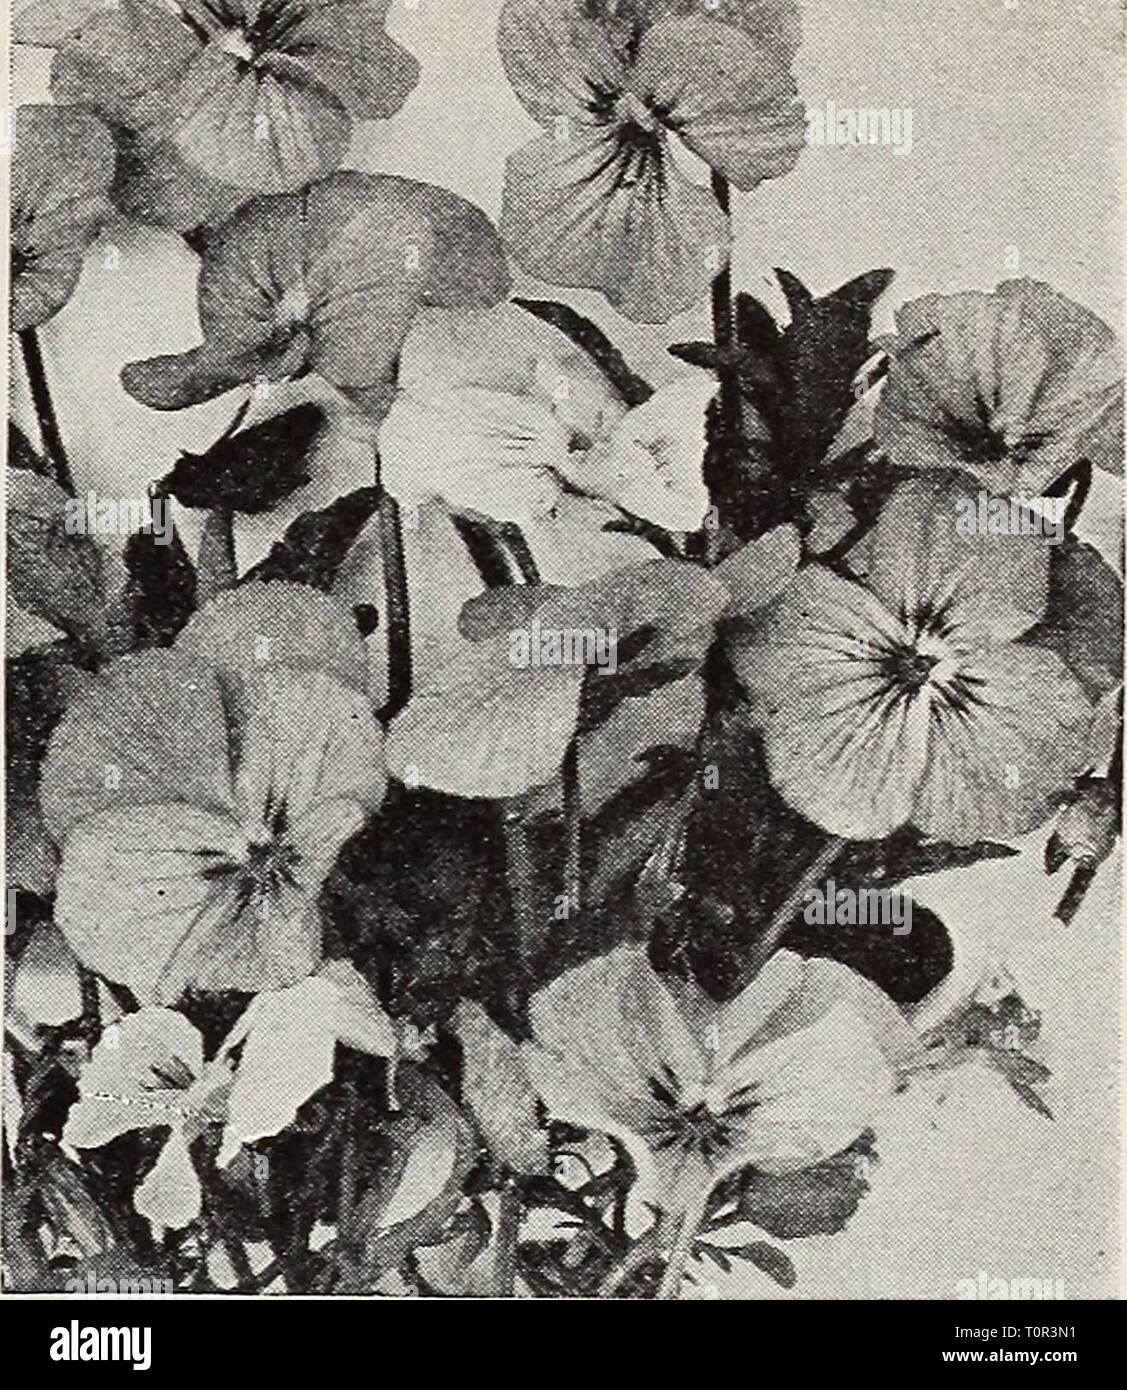 Dreer quality seeds plants bulbs Dreer quality seeds plants bulbs  dreerqualityseed1939henr Year: 1939  Valeriana—Valerian Vinca, Bowles' Variety Viola—Tufted Pansy Trollius—G/o6e Flower (D Large long-stemmed Buttercup-like blooms ranging from pale yellow to deepest orange. They delight in a moderately moist soil supplied with plenty of humus. 17-607 Europaeus superbus. Glorified globe-shaped Butter- cups of waxy lemon yeUow. Blooms May and June. 2 feet tall. Plants: 35c each; 3 for $1.00; 12 for $3.50. 17-608 Ledebouriy Golden Queen. A magnificent variety with beautiful rich golden yellow blo Stock Photo